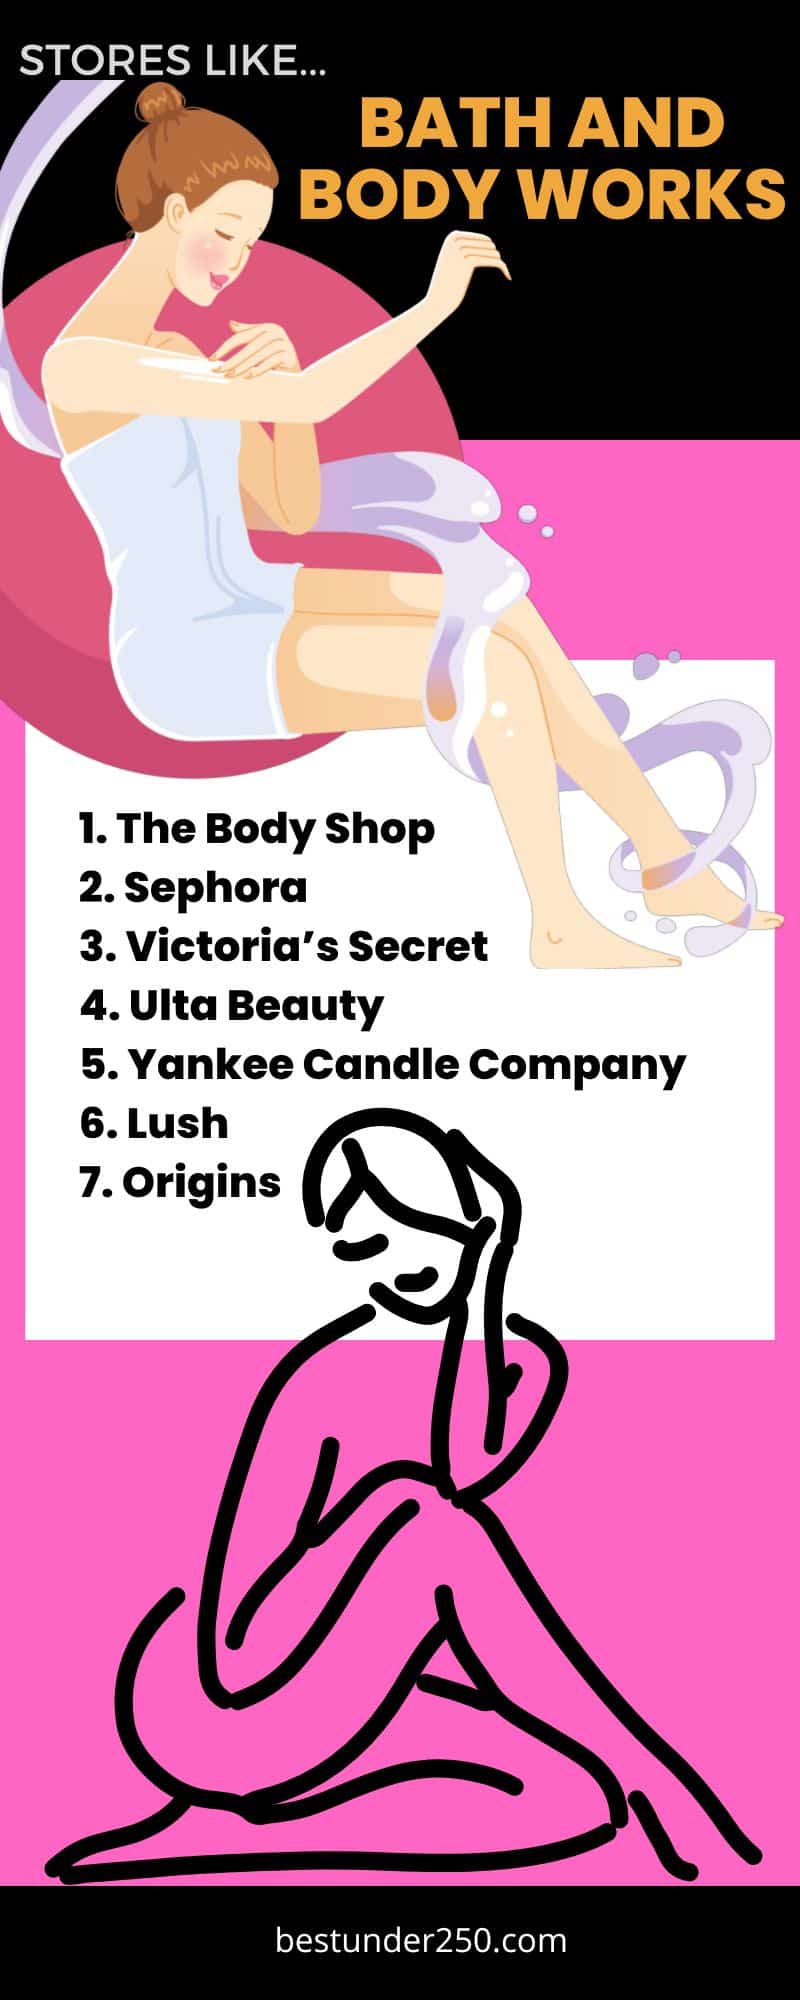 Infographic - Stores Like Bath and Body Works